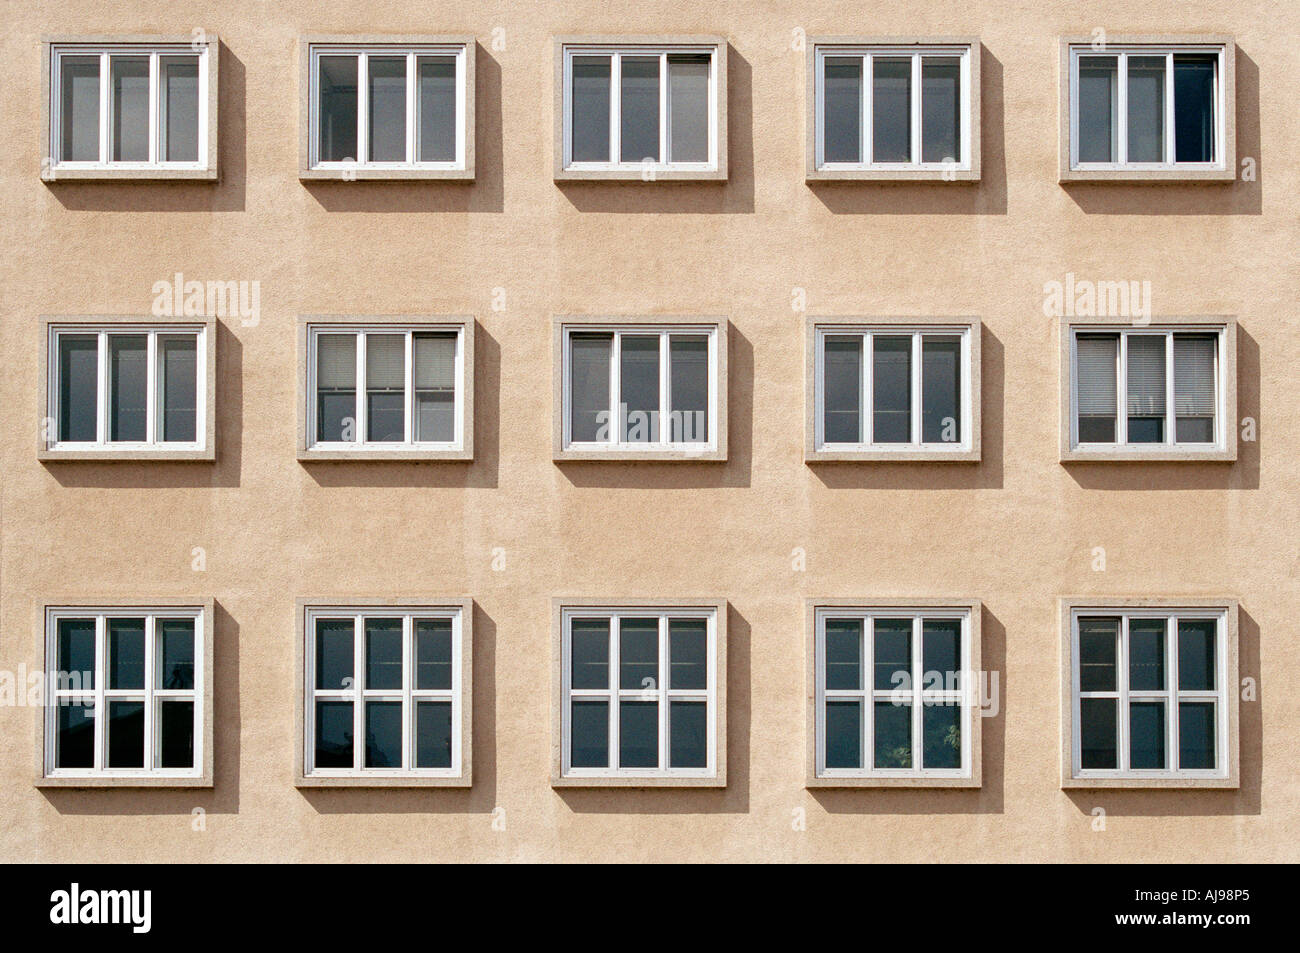 Windows of residential apartments Stock Photo